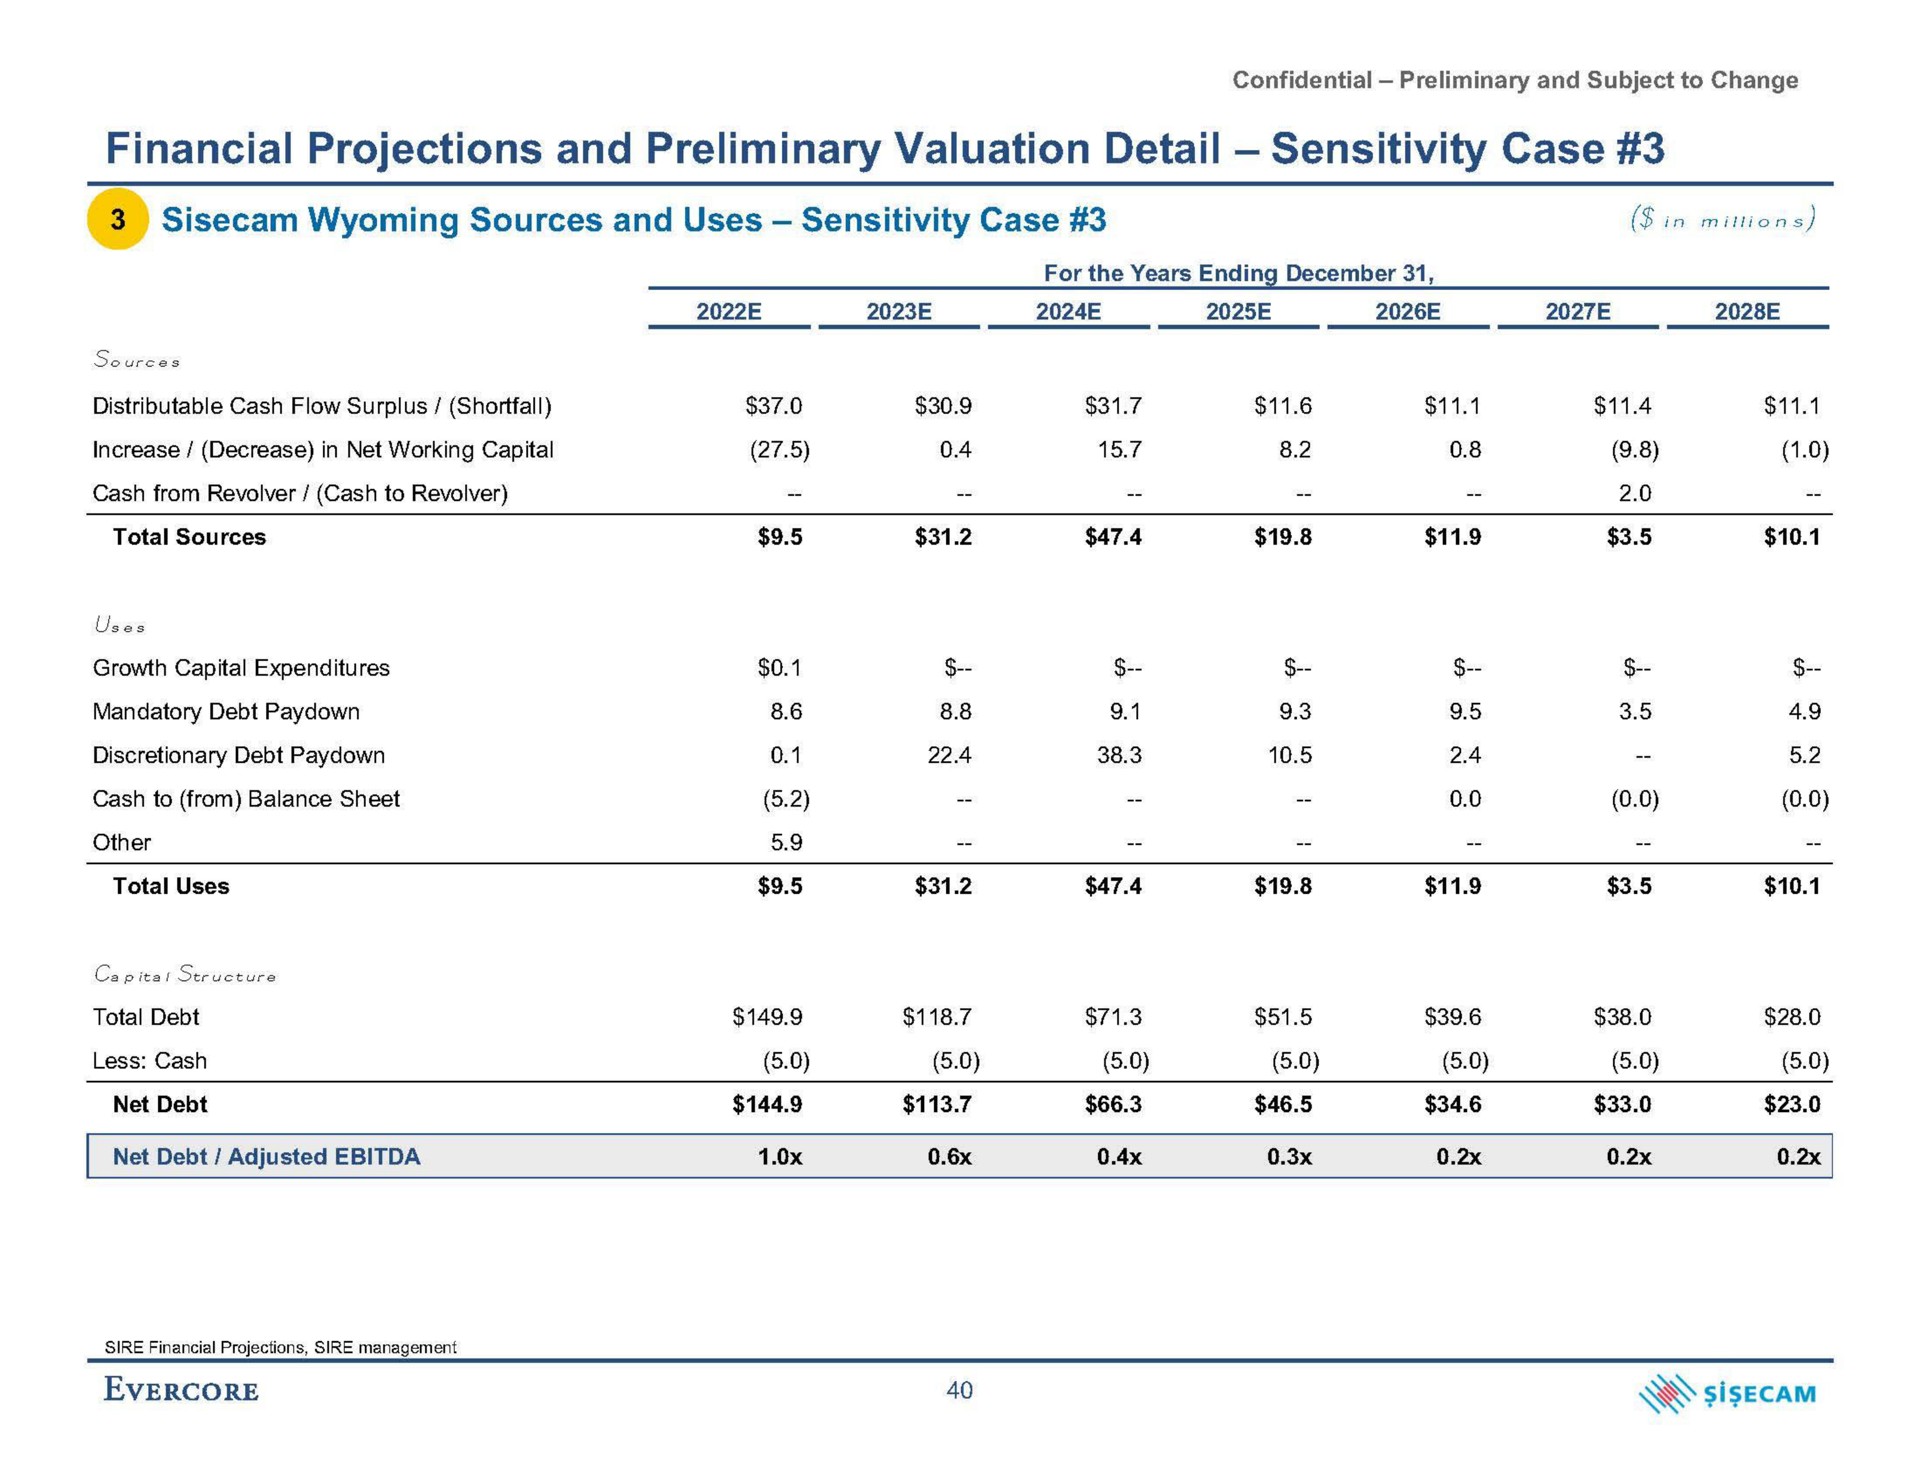 financial projections and preliminary valuation detail sensitivity case sources and uses sensitivity case | Evercore